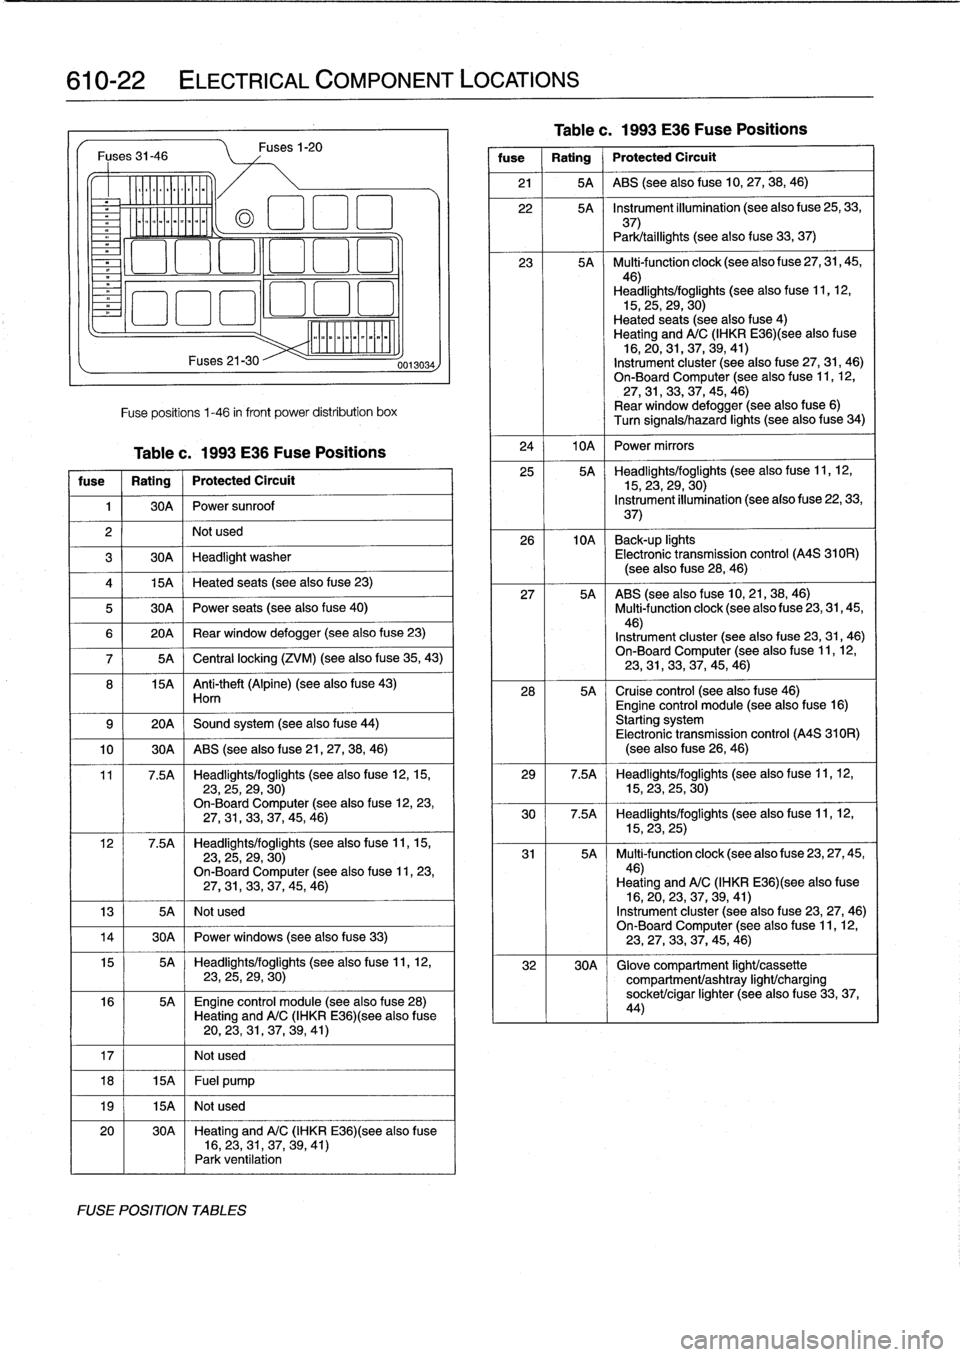 BMW 325i 1992 E36 Workshop Manual 
610-22

	

ELECTRICAL
COMPONENT
LOCATIONS

Fuses
31-46

Ylililll

milililil
Fuses
21-30
Fuse
positions
1-46
in
front
Power
distribution
box

Table
c
.
1993
E36
Fuse
Positions

fuse

	

1
Rating

	

j